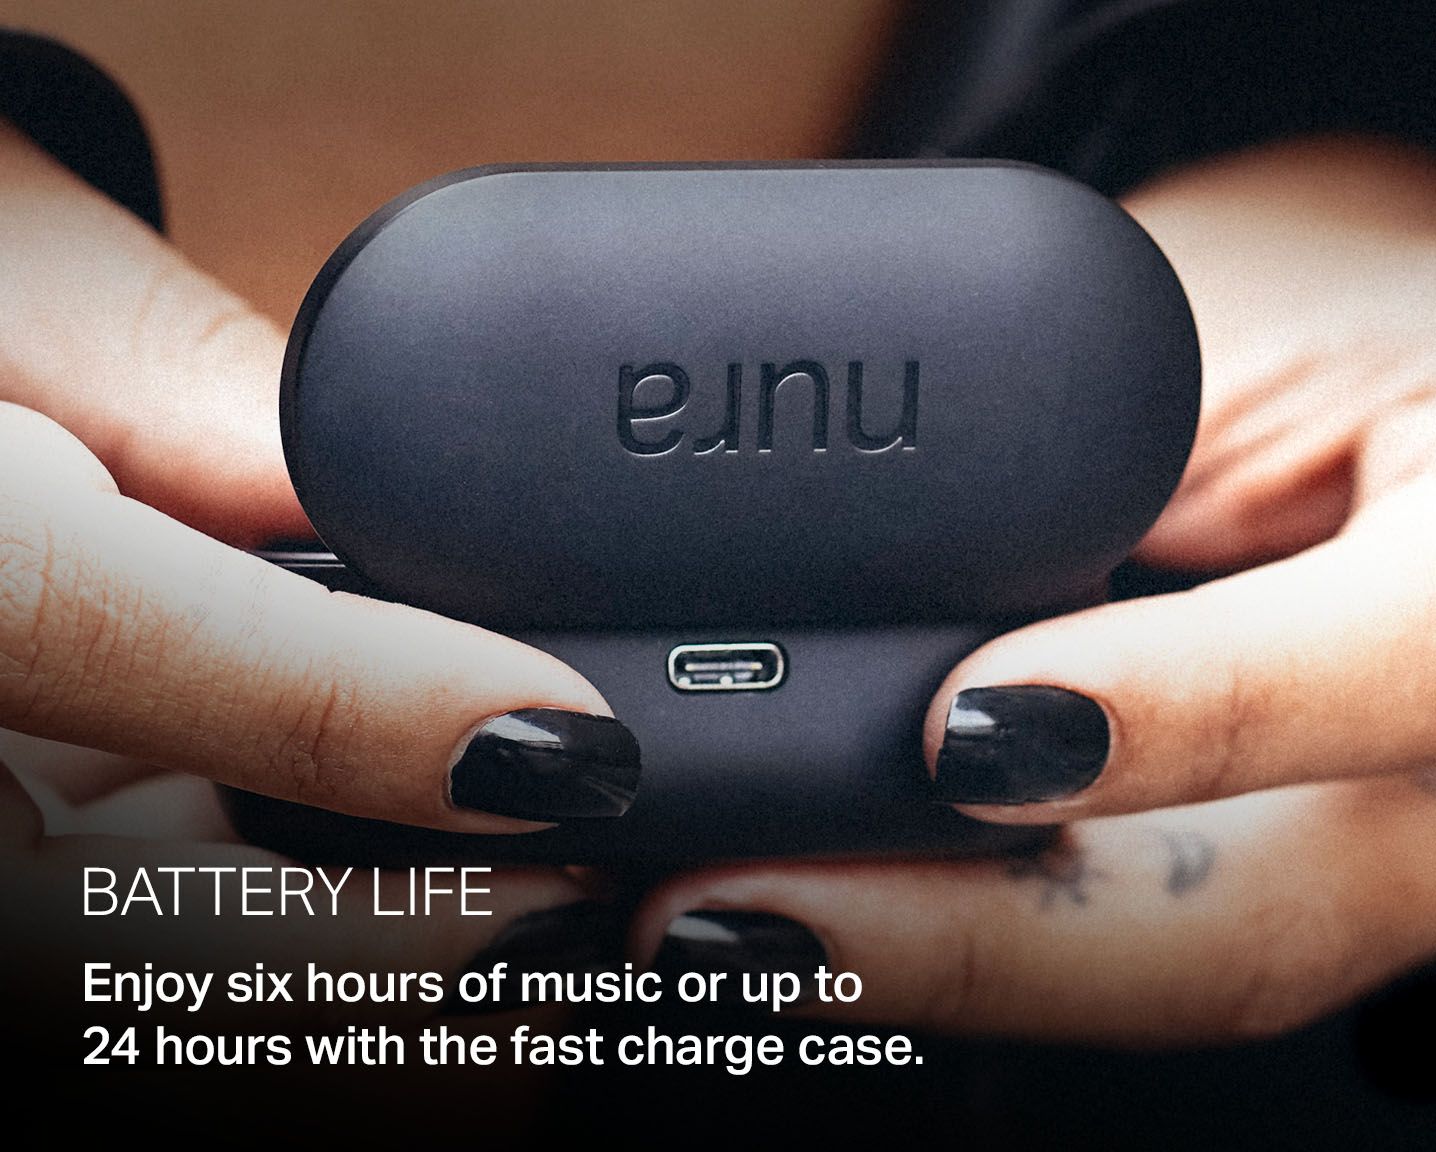 Close-up shot of hands holding the NURATRUE earbuds battery case, with overlay text: "Battery life. Enjoy six hours of music or up to 24 hours with the fast charge case."